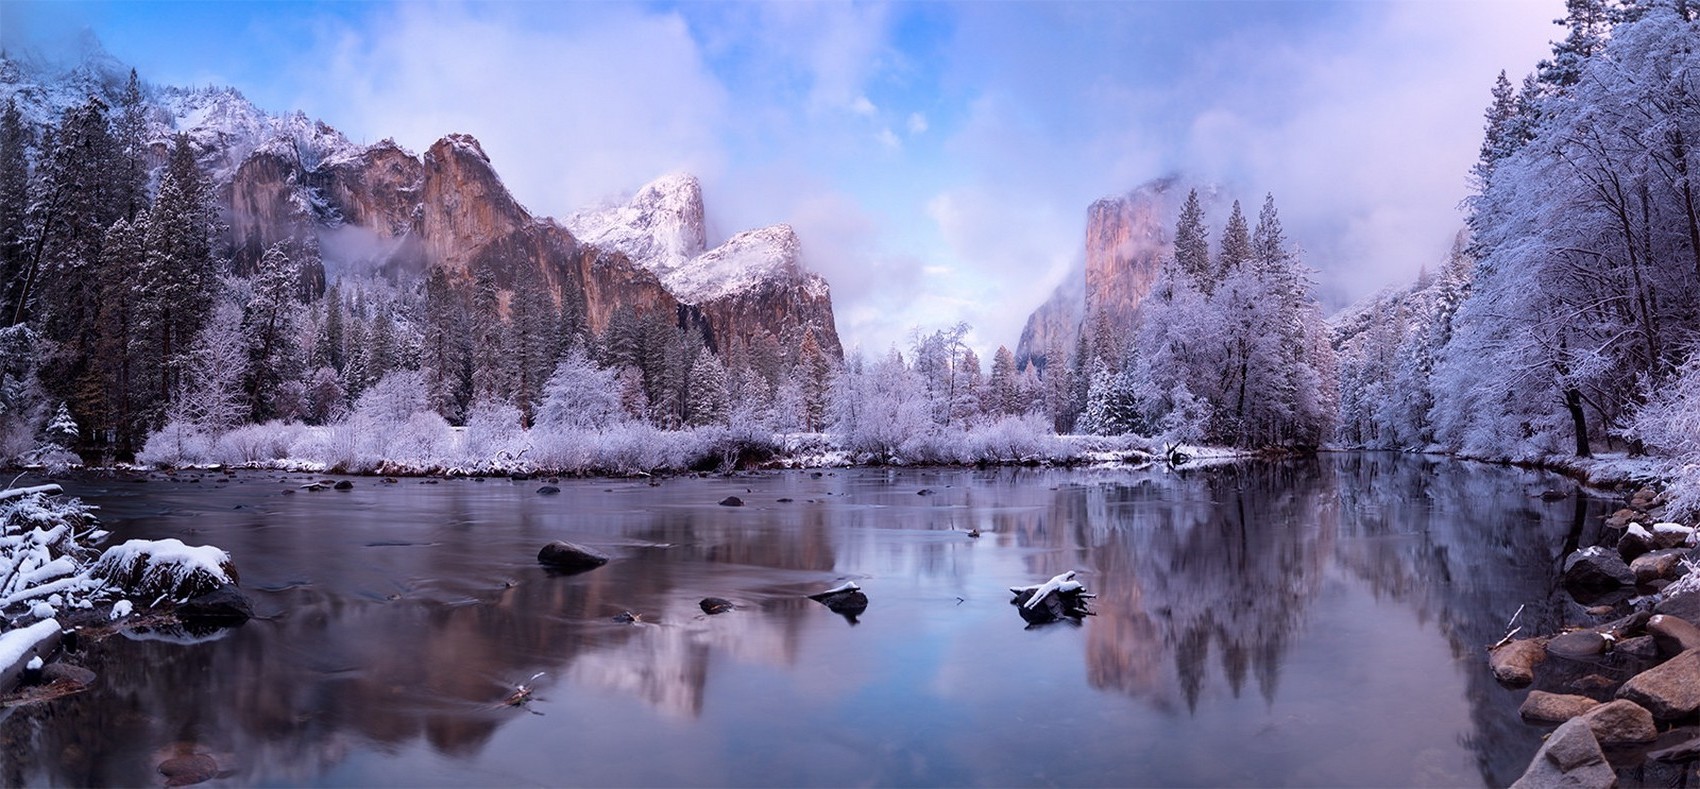 photography, Nature, Landscape, Winter, Valley, Forest, River, Mountains, Snow, Yosemite National Park, California Wallpaper